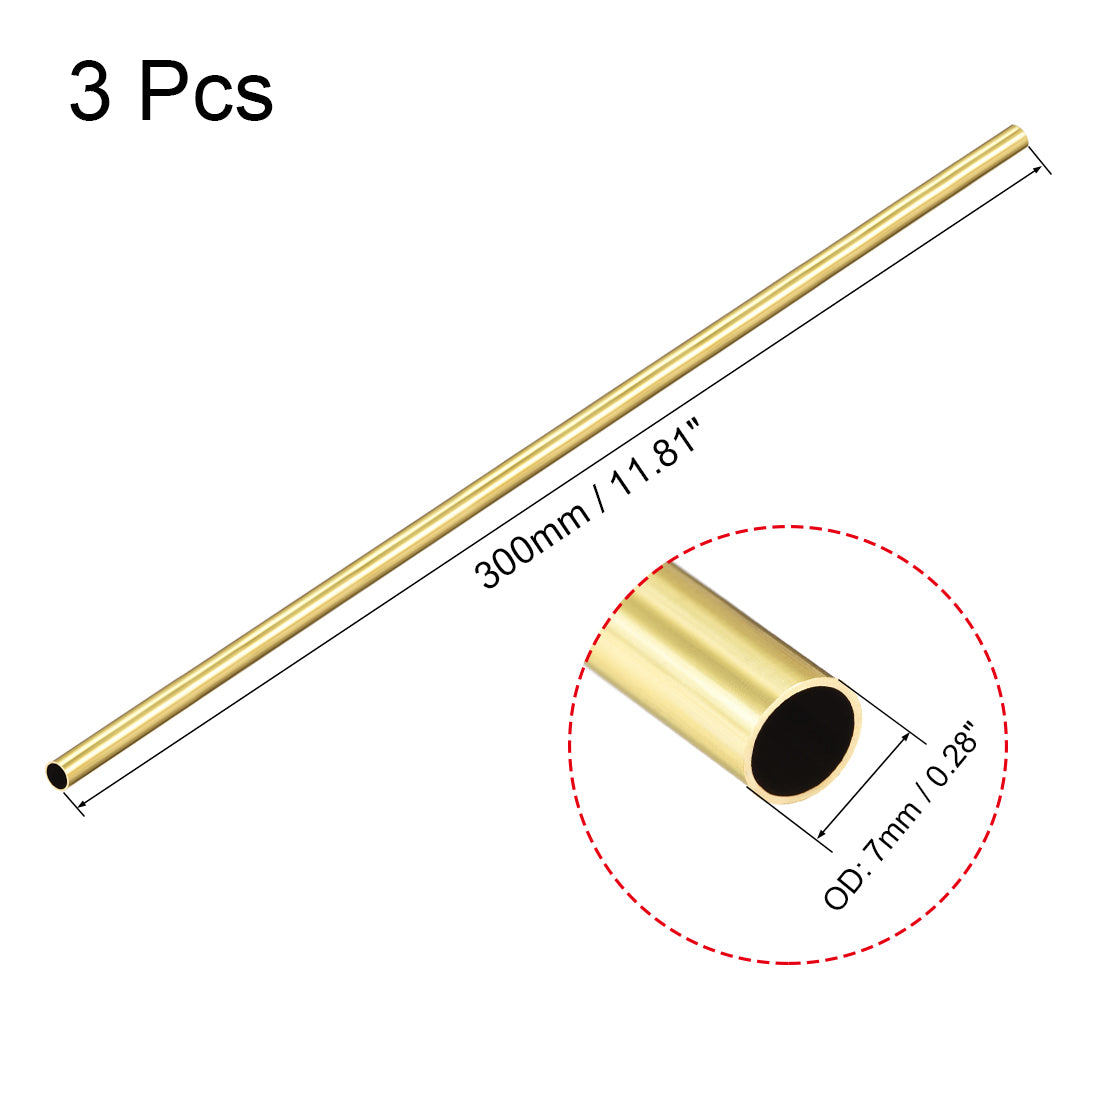 Uxcell Uxcell Brass Round Tube 300mm Length 7mm OD 0.5mm Wall Thickness Seamless Straight Pipe Tubing 3 Pcs